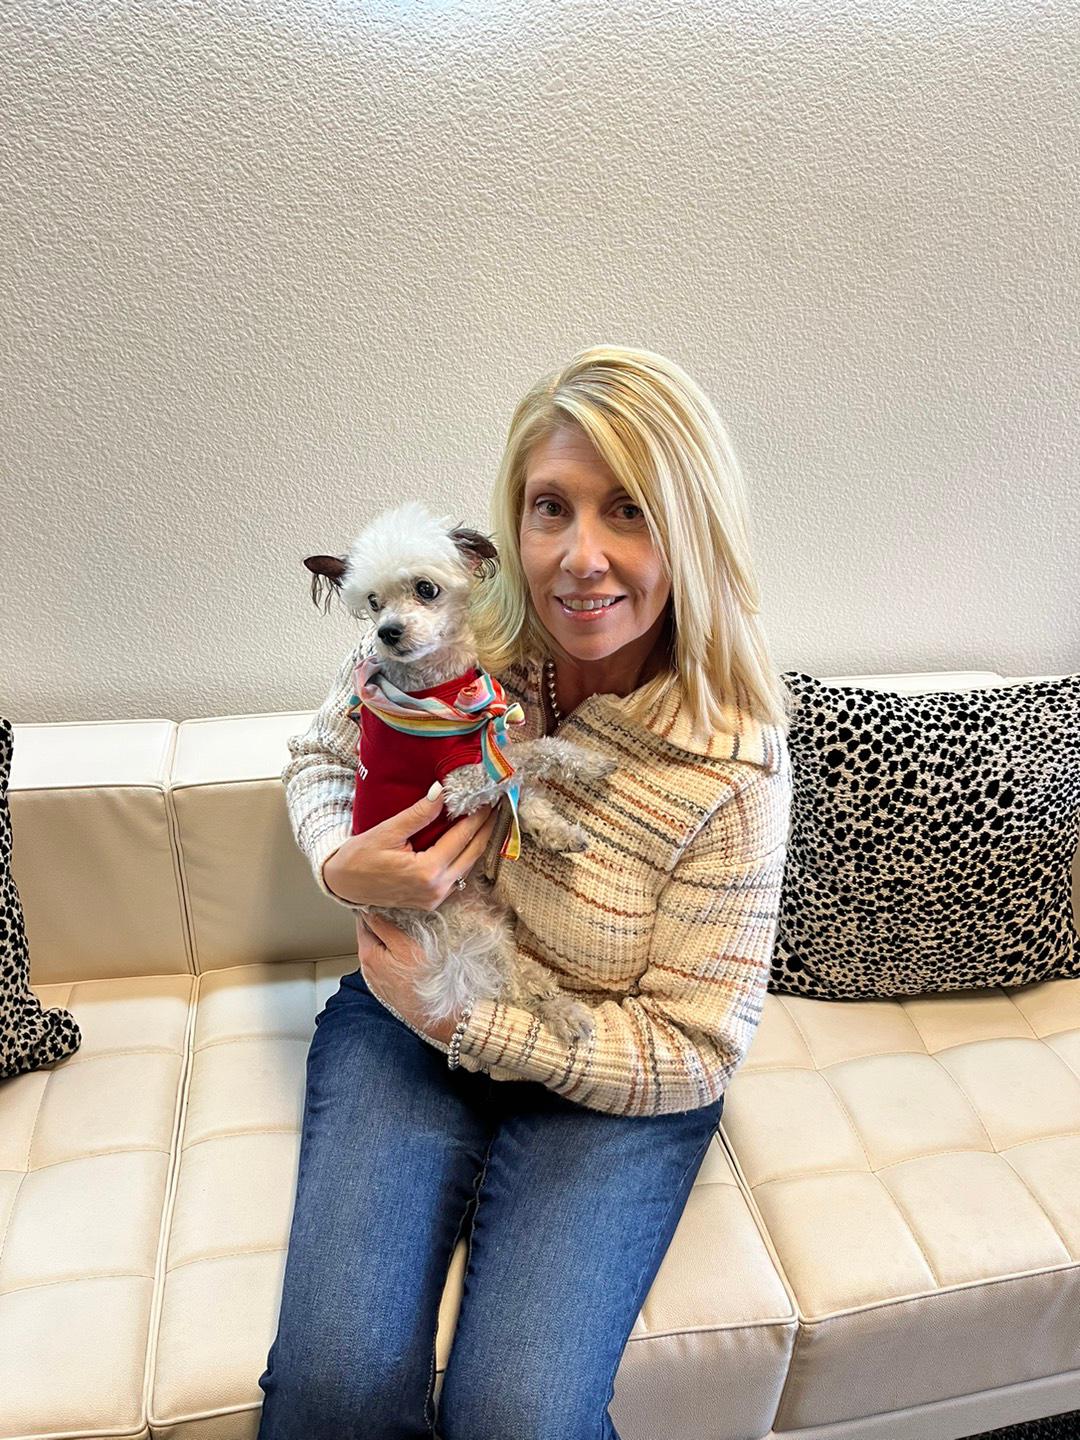 Carrie and Odie! James Madrid - State Farm Insurance Agent Las Vegas (702)998-8700